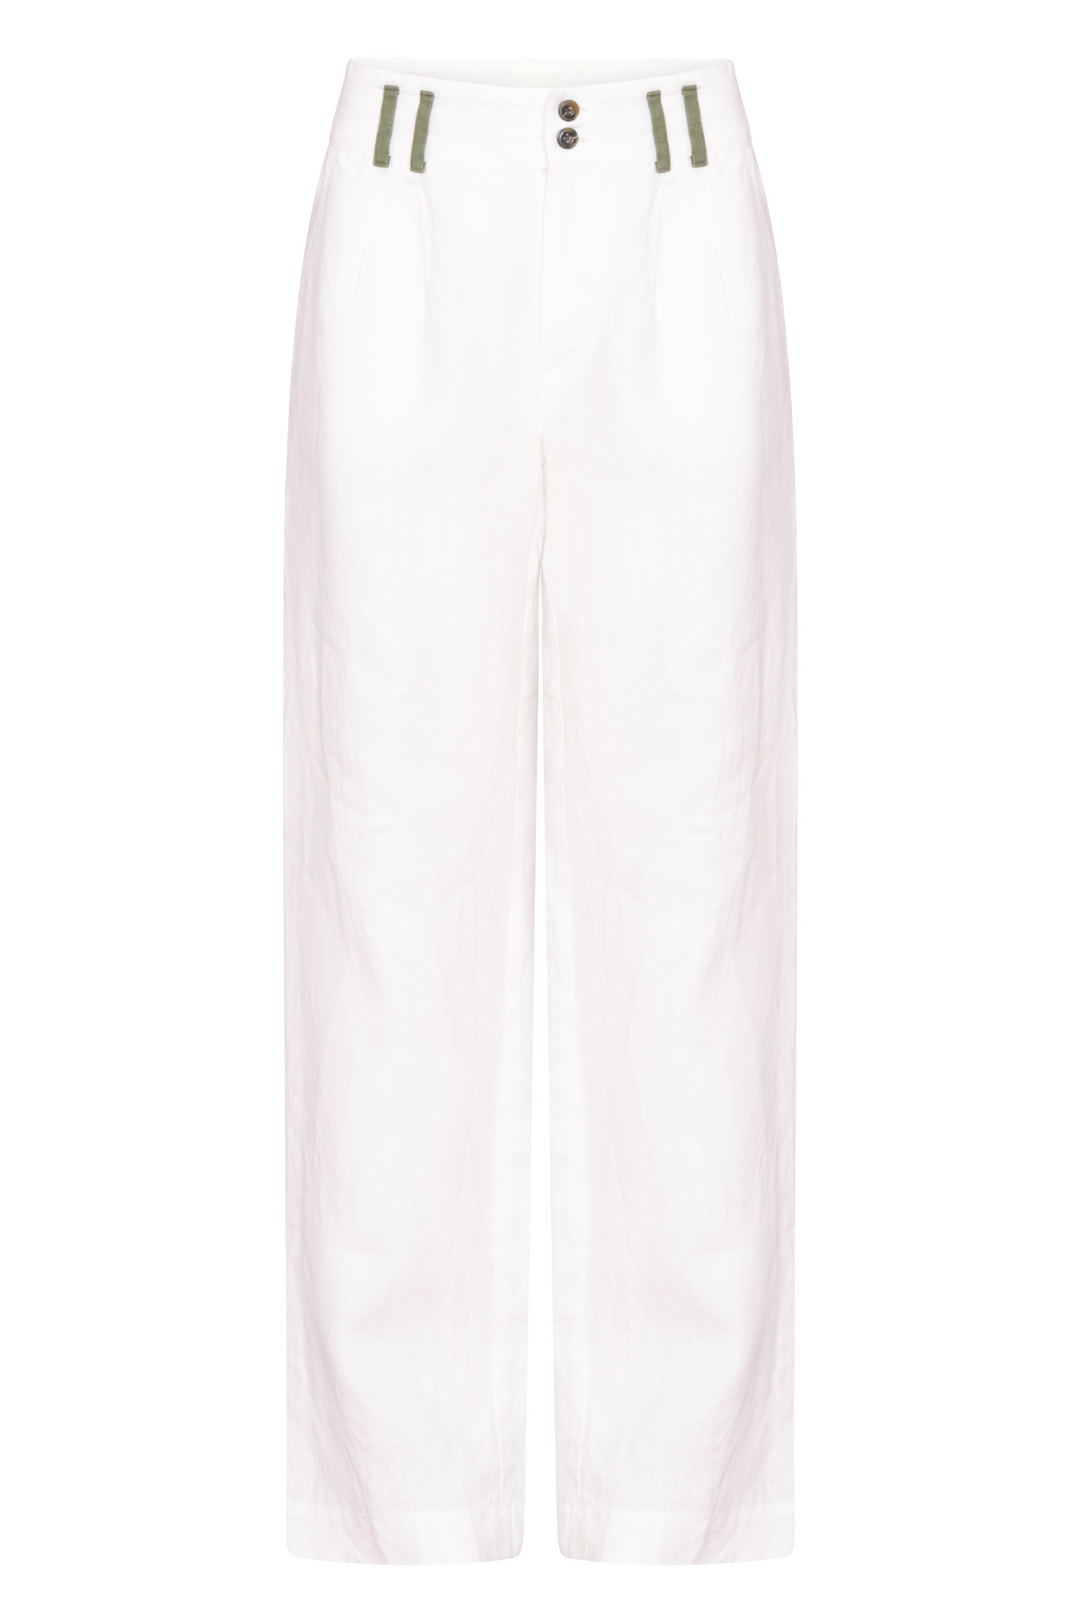 White Linen Trousers - noemotions-store